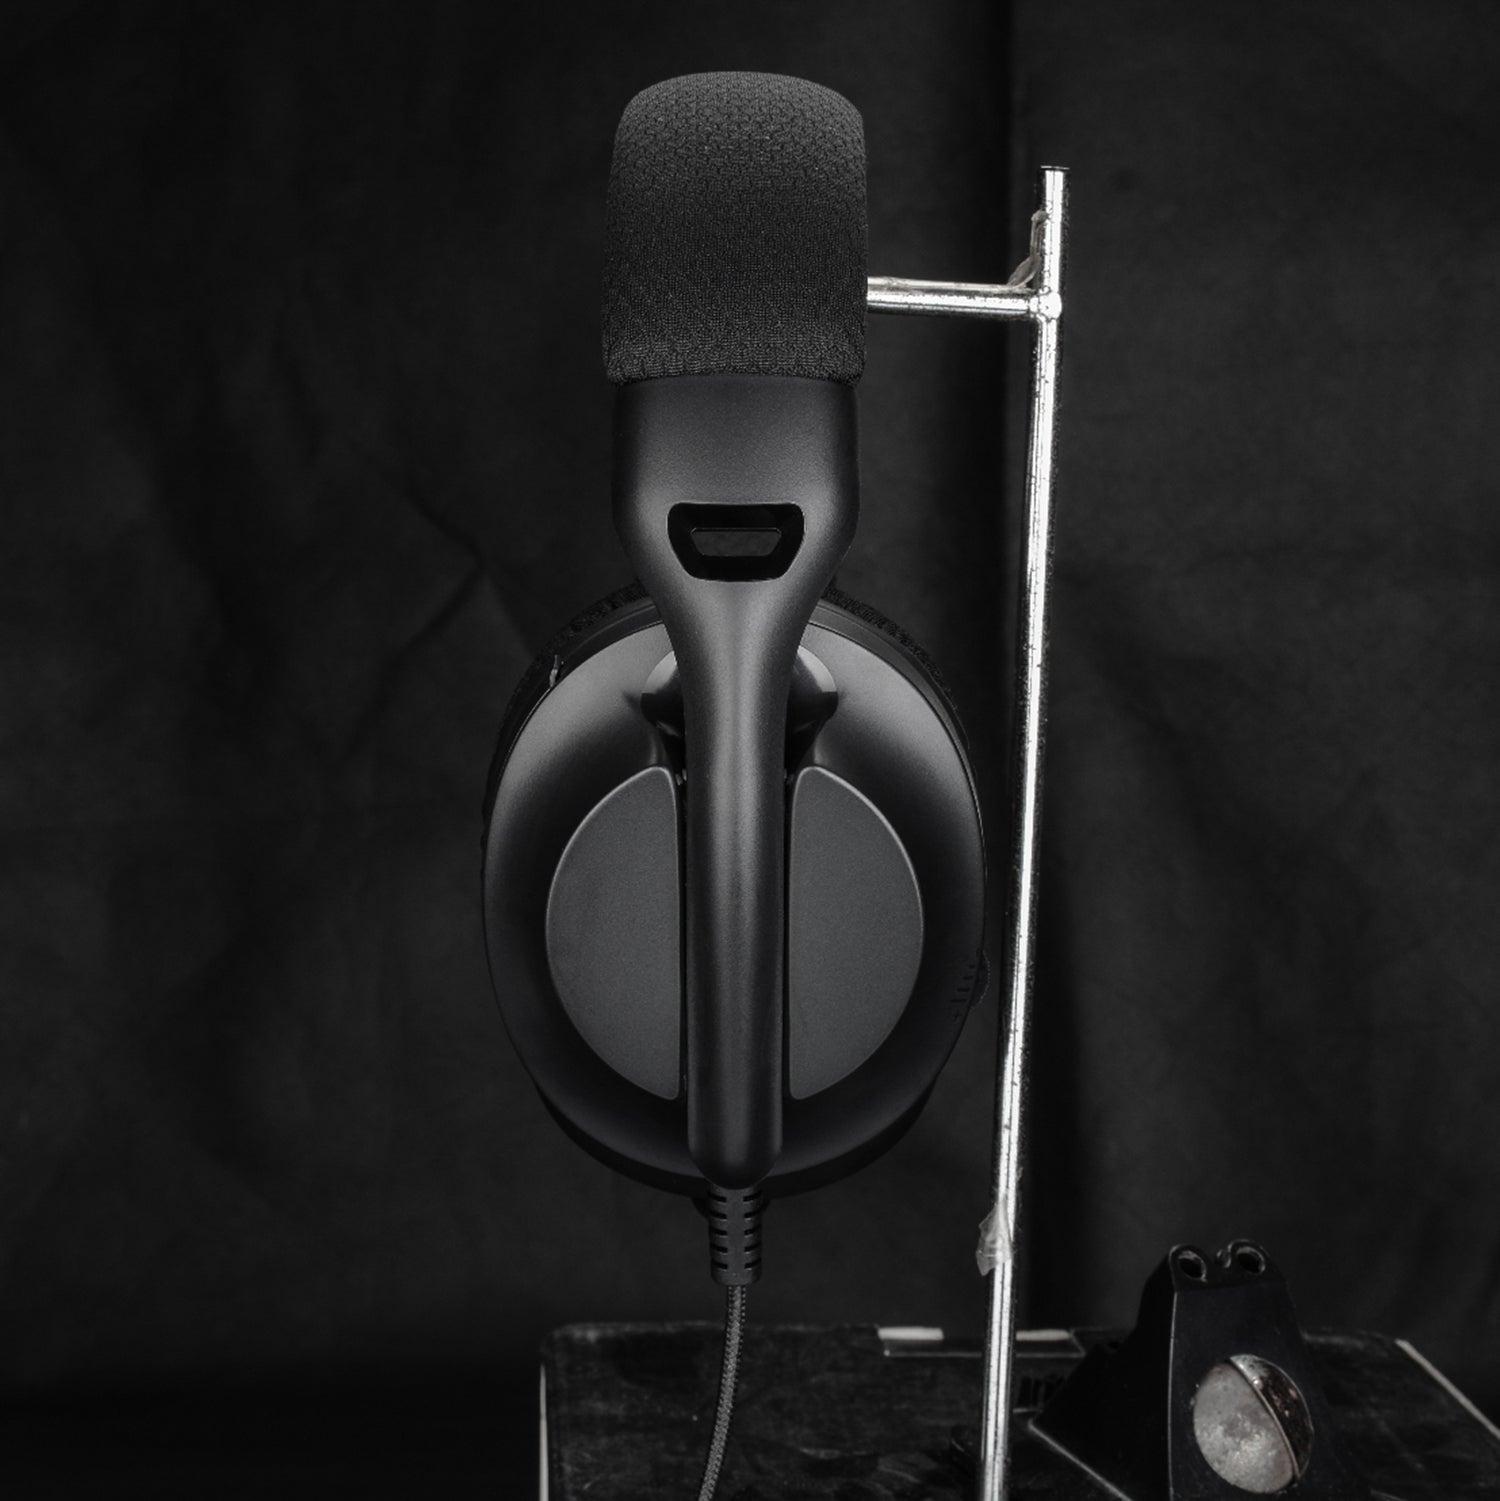 M360 Tri-Mode Gaming Headset In Black with Microphone Down Tilted On Headset Stand Side View